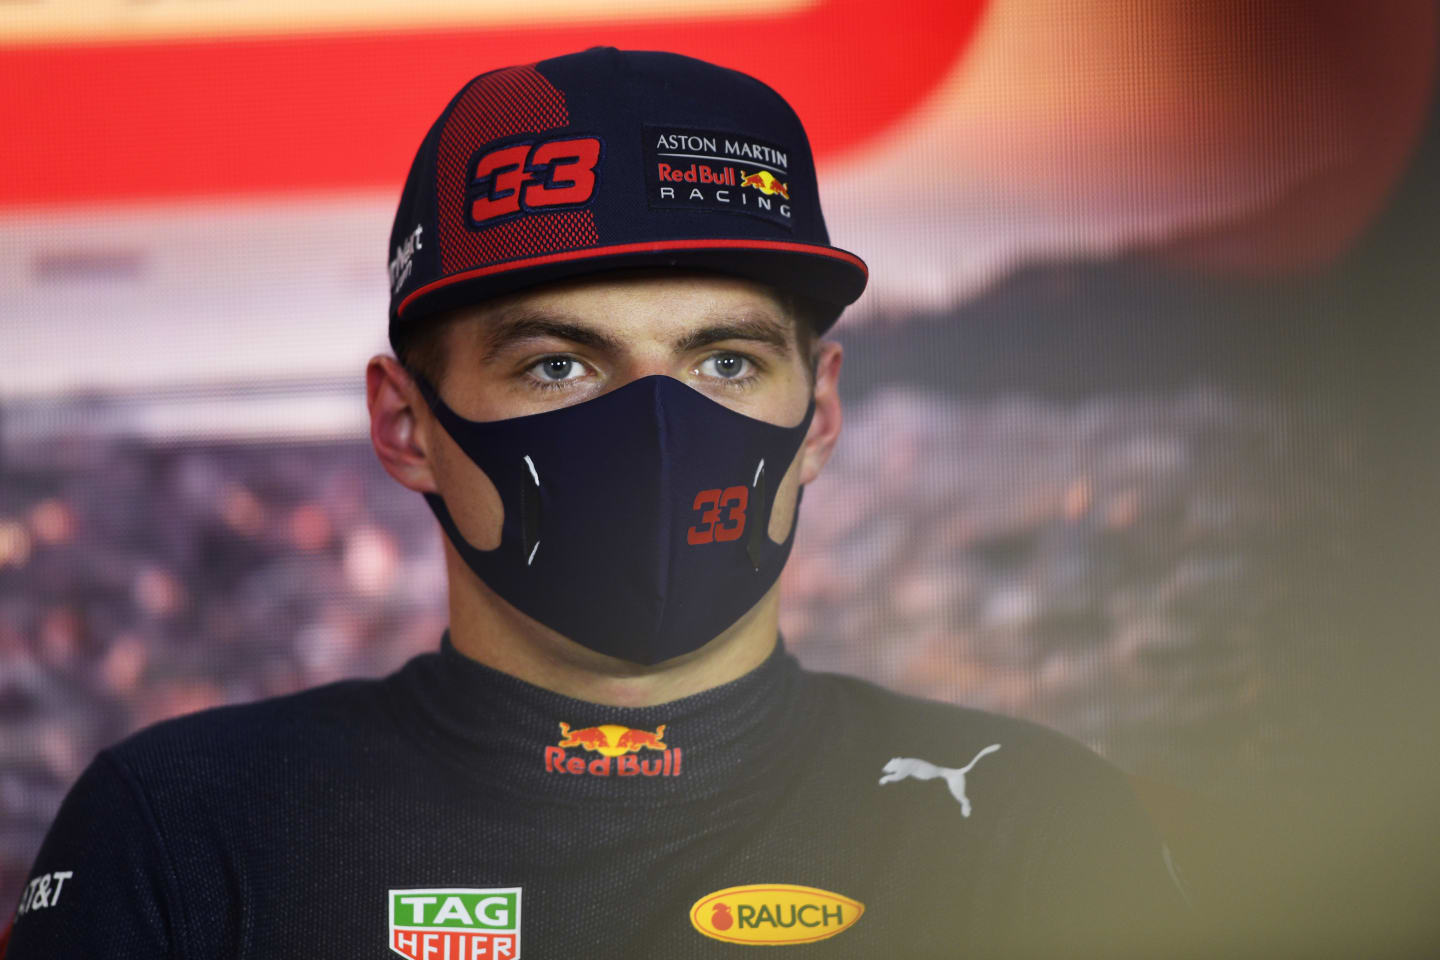 BARCELONA, SPAIN - AUGUST 15: Third placed qualifier Max Verstappen of Netherlands and Red Bull